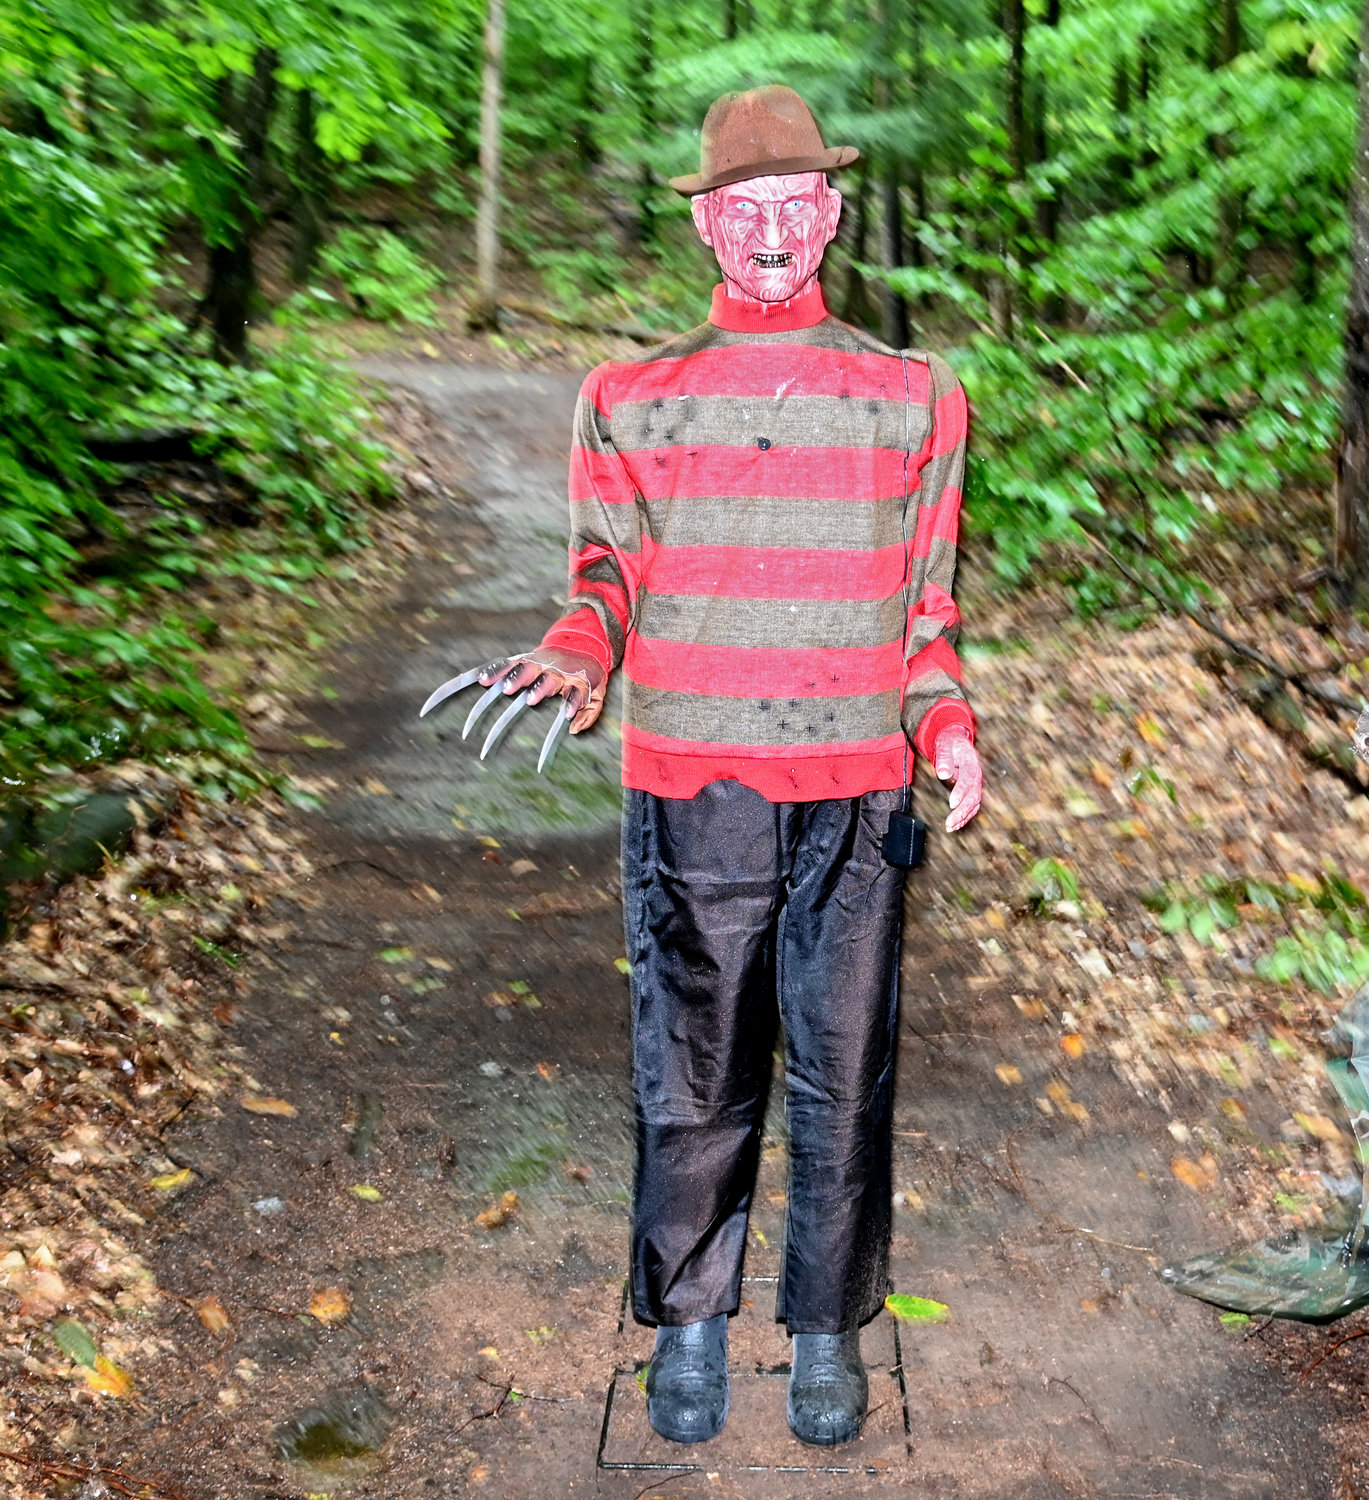 Freddy Krueger, of A Nightmare on Elm Street fame, is ready to scare travelers along the Haunting in the Woods trail at 3200 Forward Road, Blossvale.